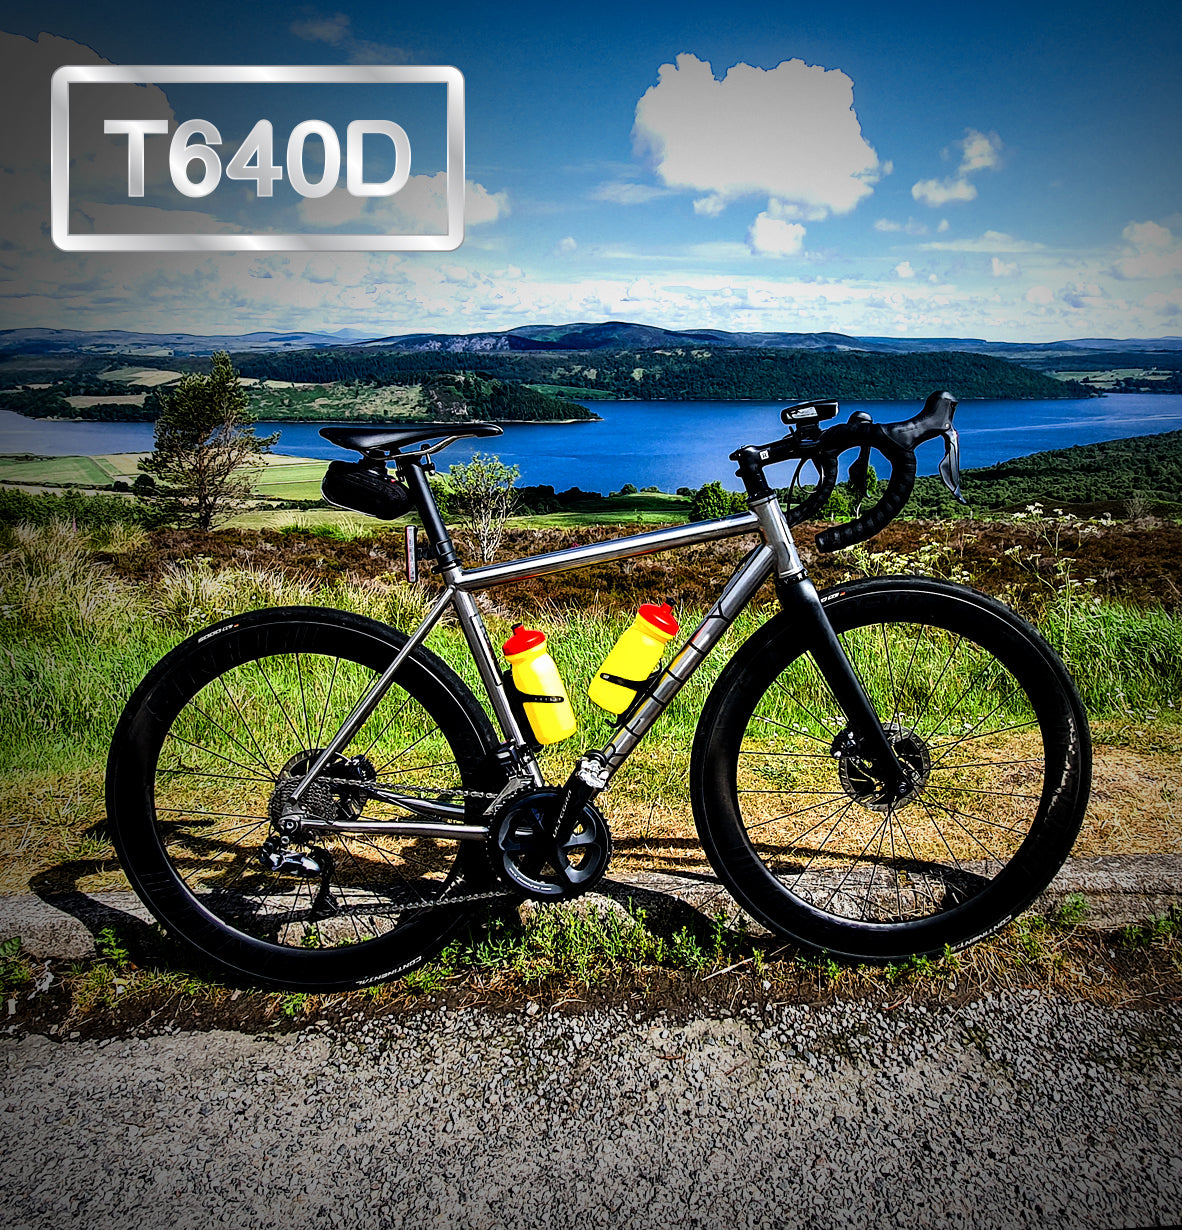 Road Bike in the foreground with beautiful green landscape and lake in the background. T640D is written top left.